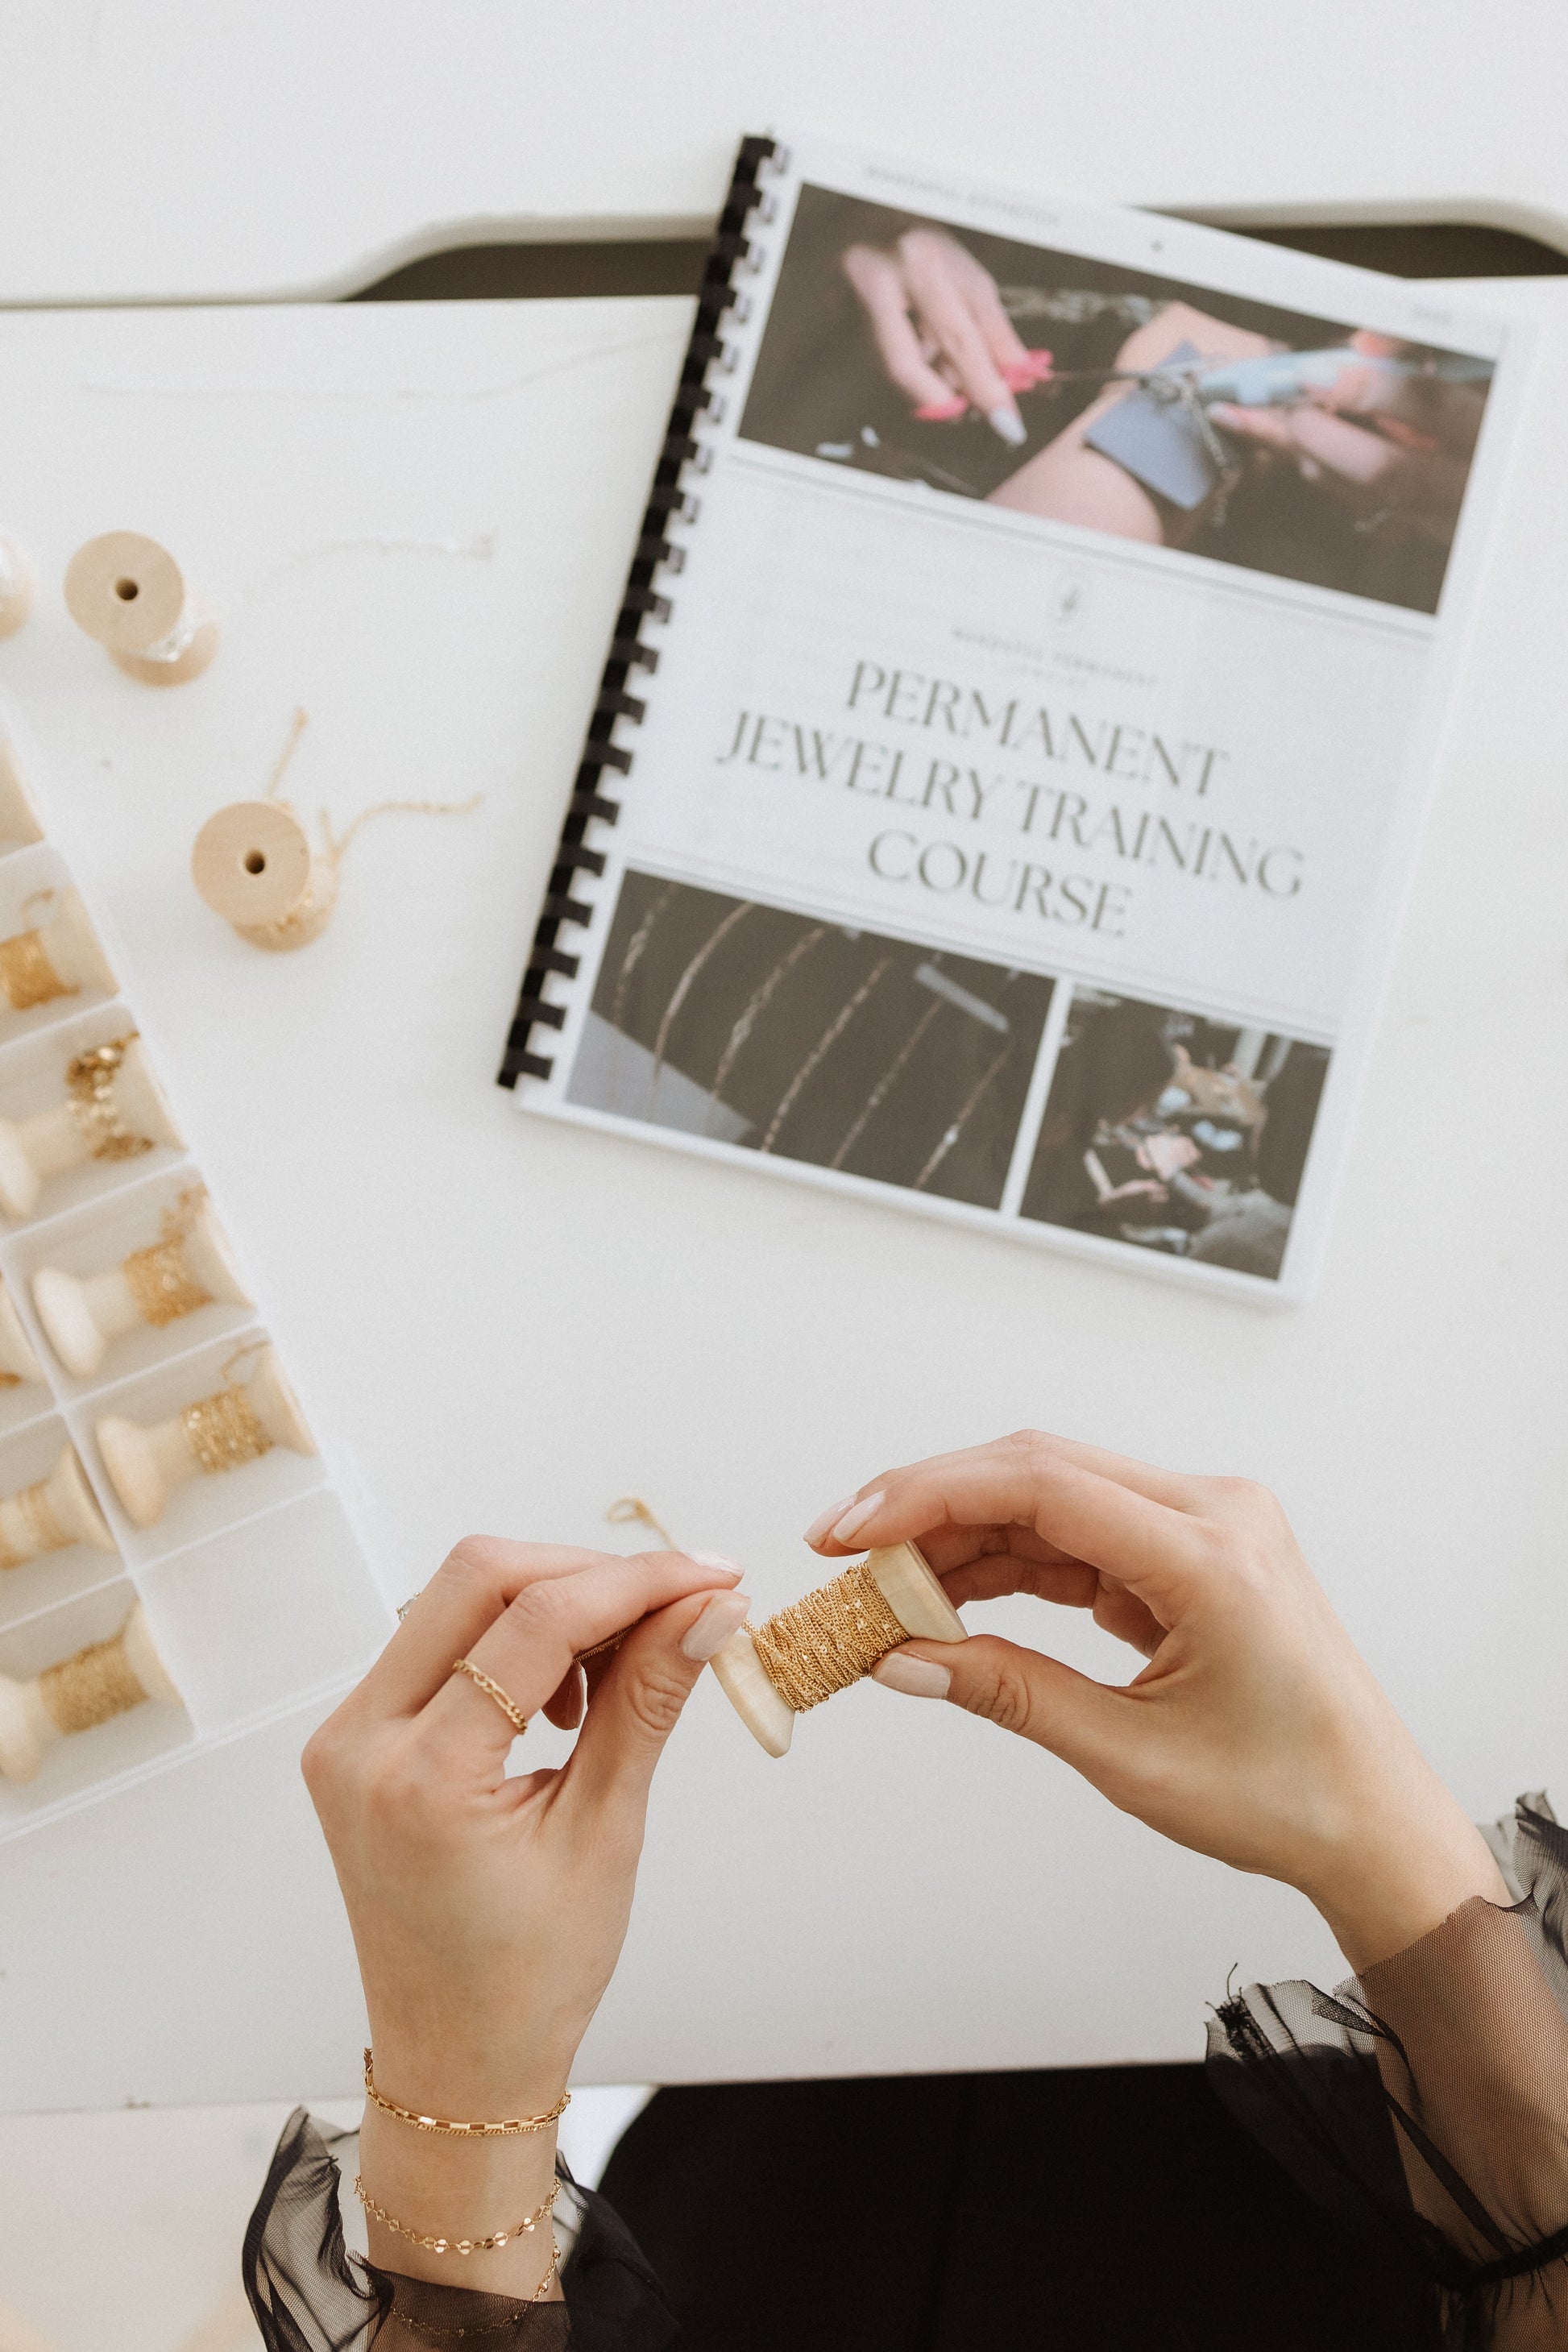 Permanent Jewelry Training Course